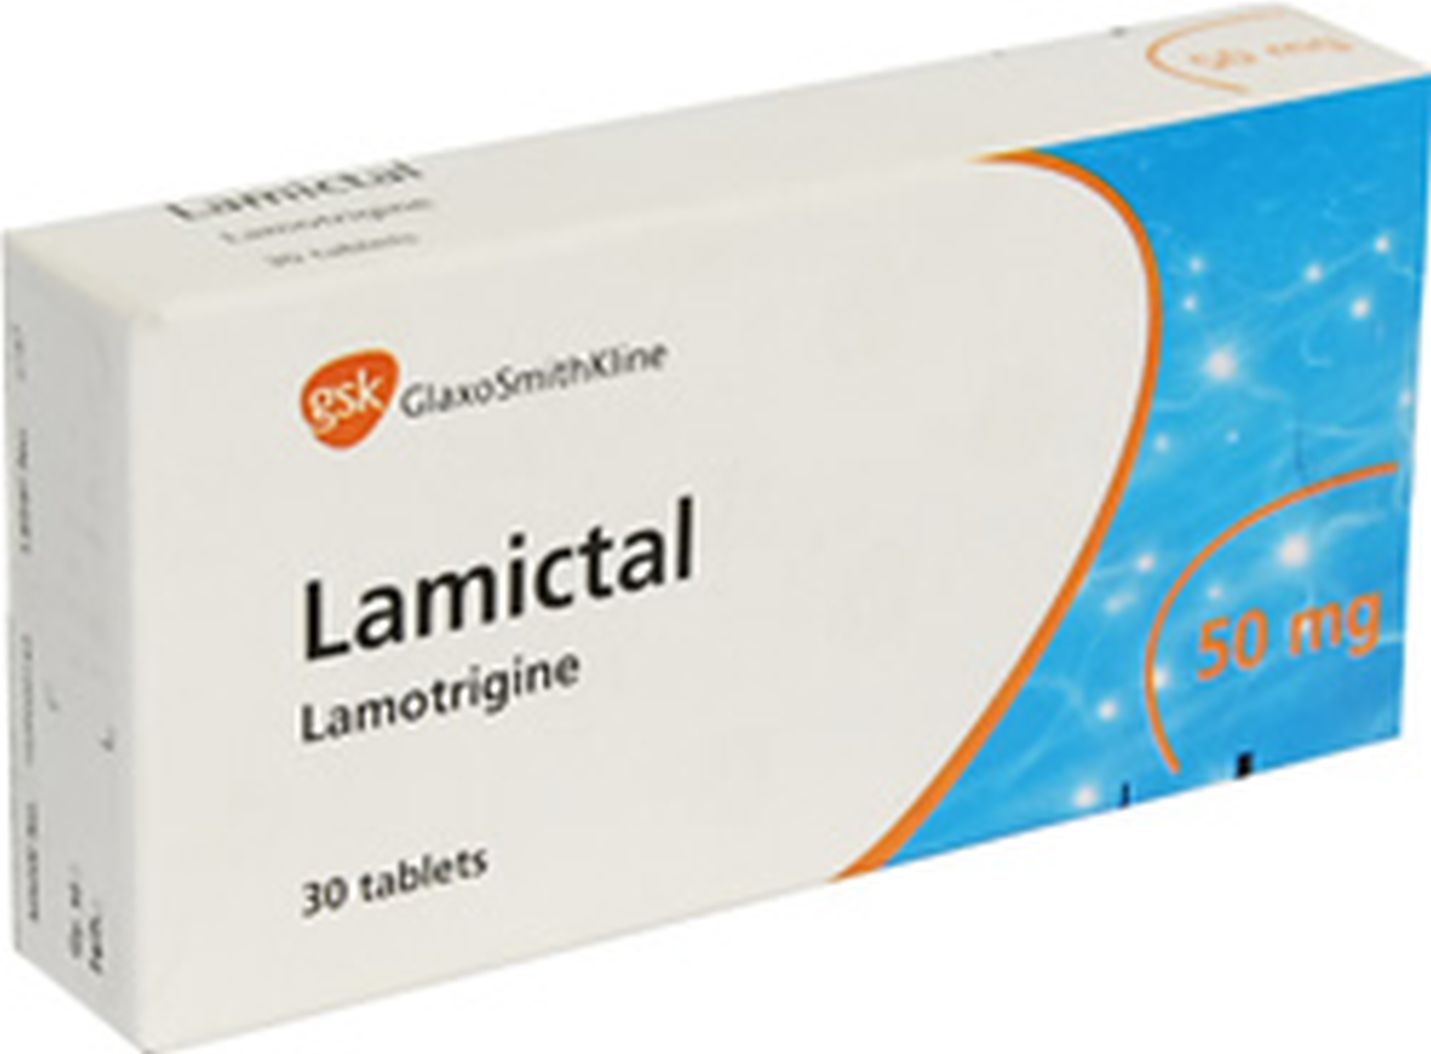 what is the medication lamictal for